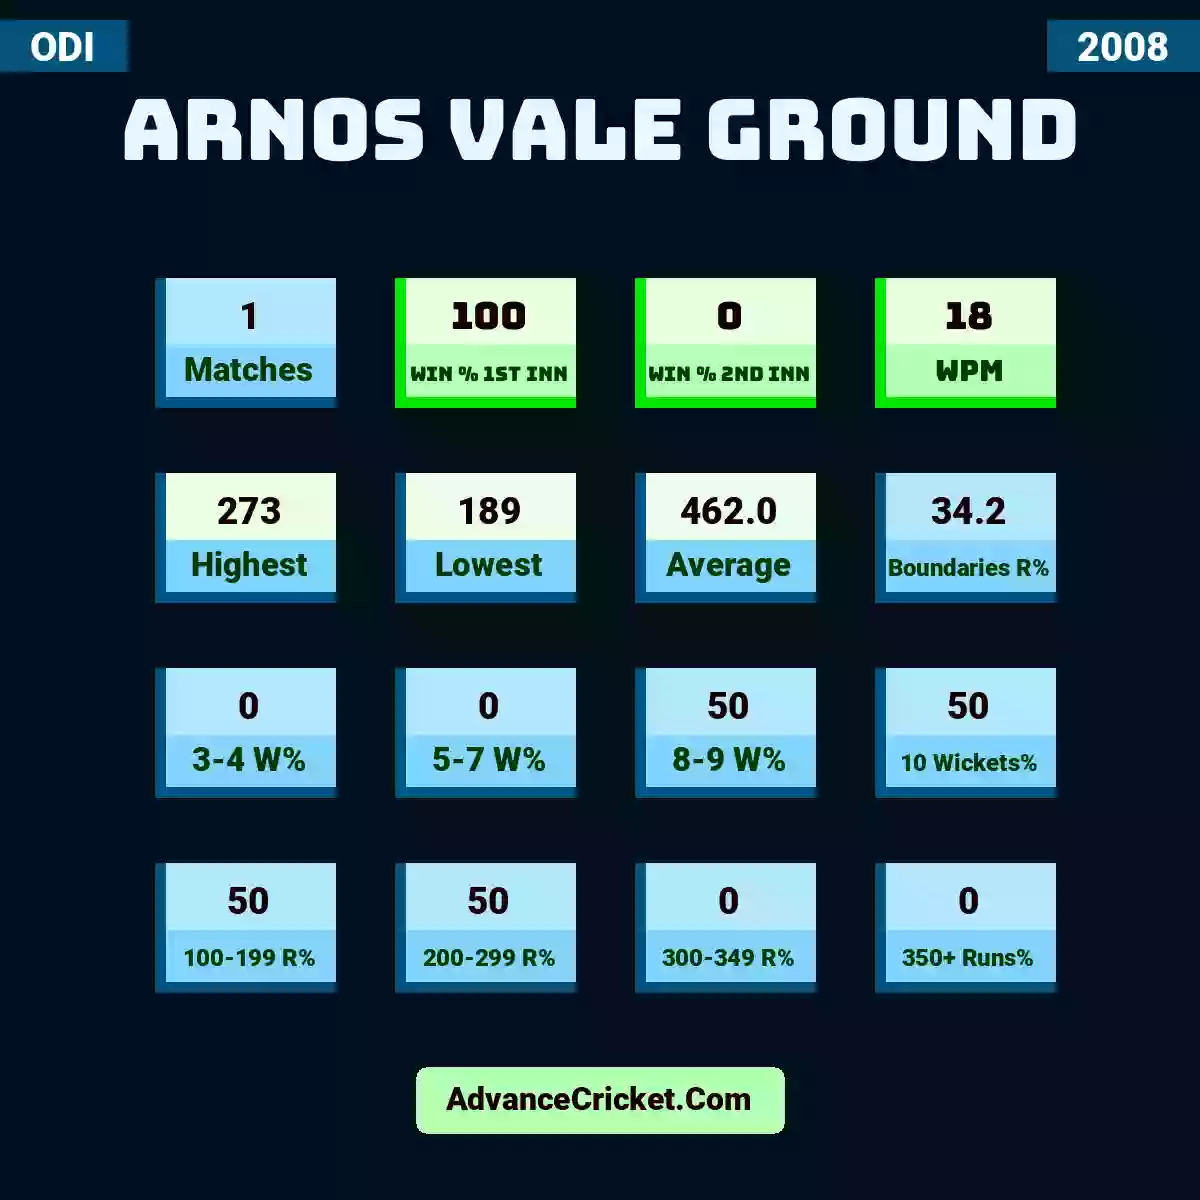 Image showing Arnos Vale Ground with Matches: 1, Win % 1st Inn: 100, Win % 2nd Inn: 0, WPM: 18, Highest: 273, Lowest: 189, Average: 462.0, Boundaries R%: 34.2, 3-4 W%: 0, 5-7 W%: 0, 8-9 W%: 50, 10 Wickets%: 50, 100-199 R%: 50, 200-299 R%: 50, 300-349 R%: 0, 350+ Runs%: 0.